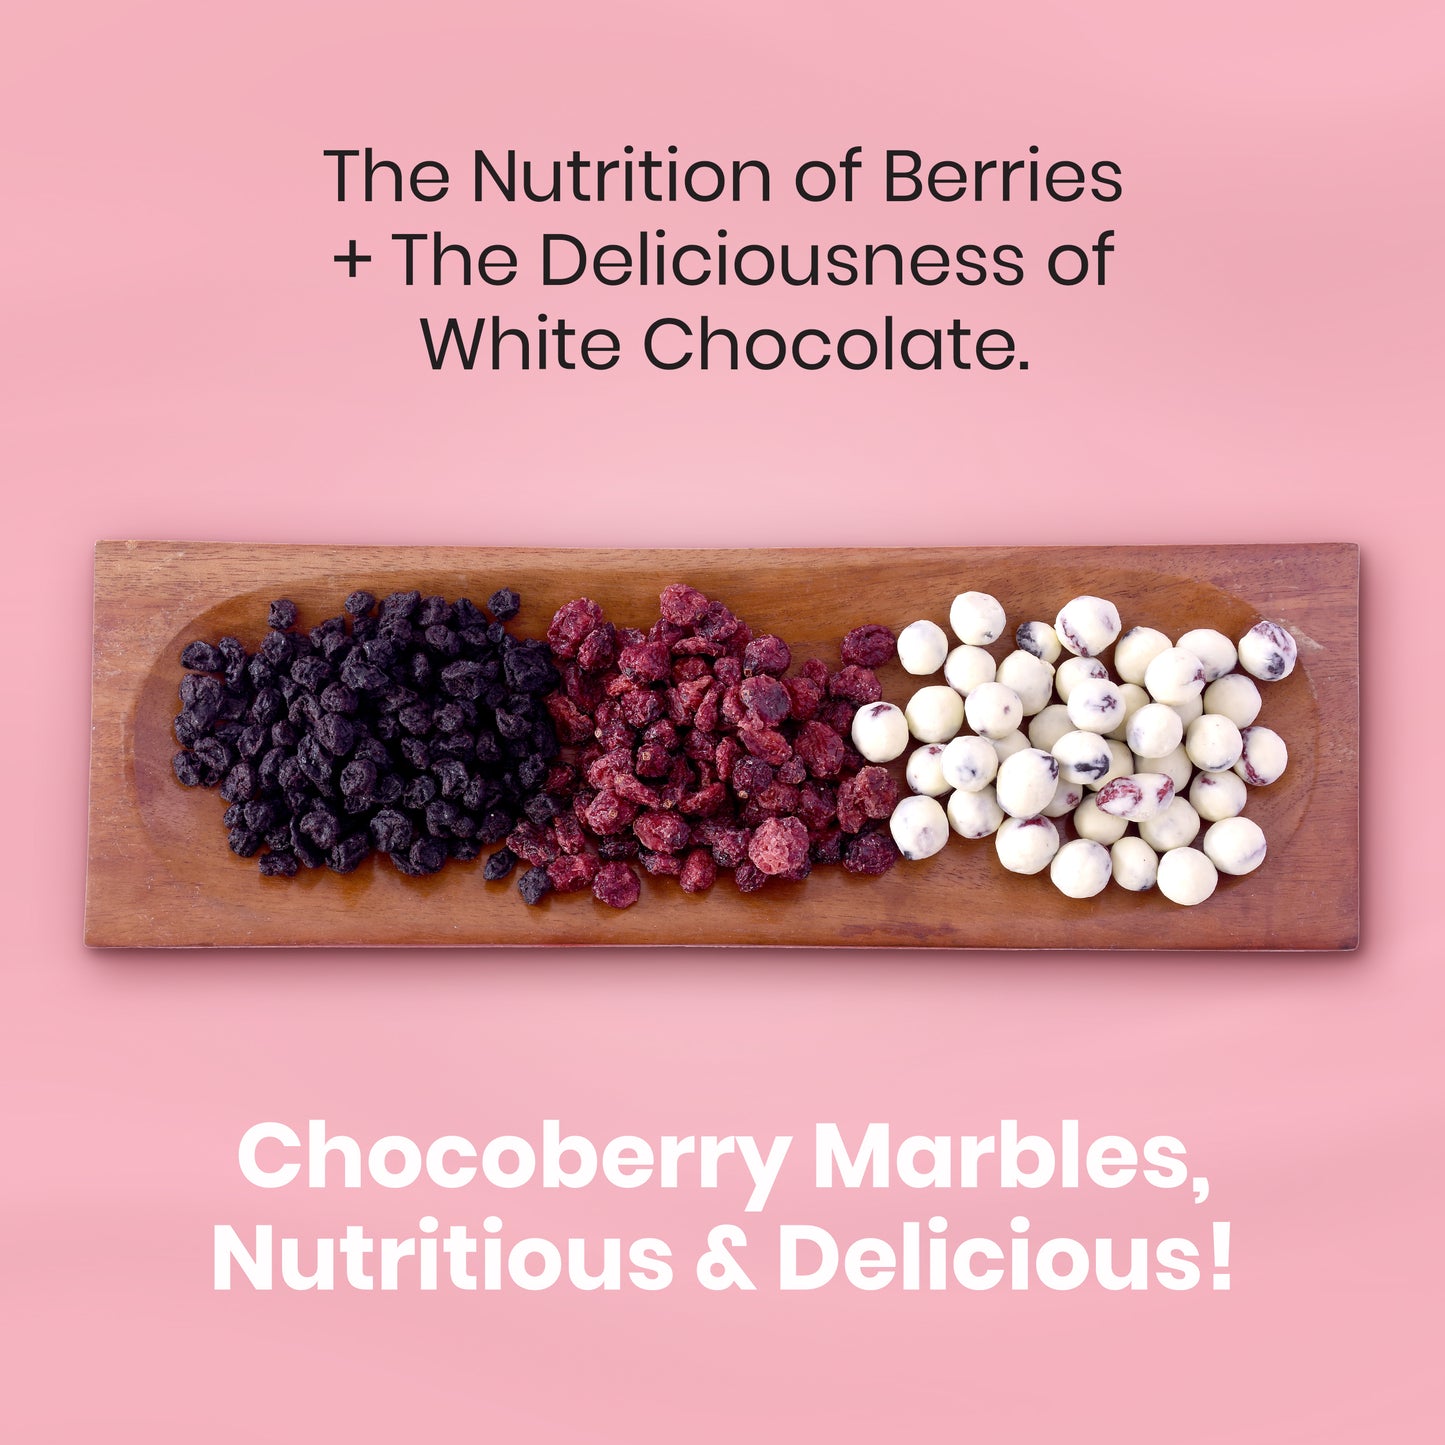 Chocoberry Marbles - Blueberries & Cranberries Covered in White Chocolate (240g Jar)